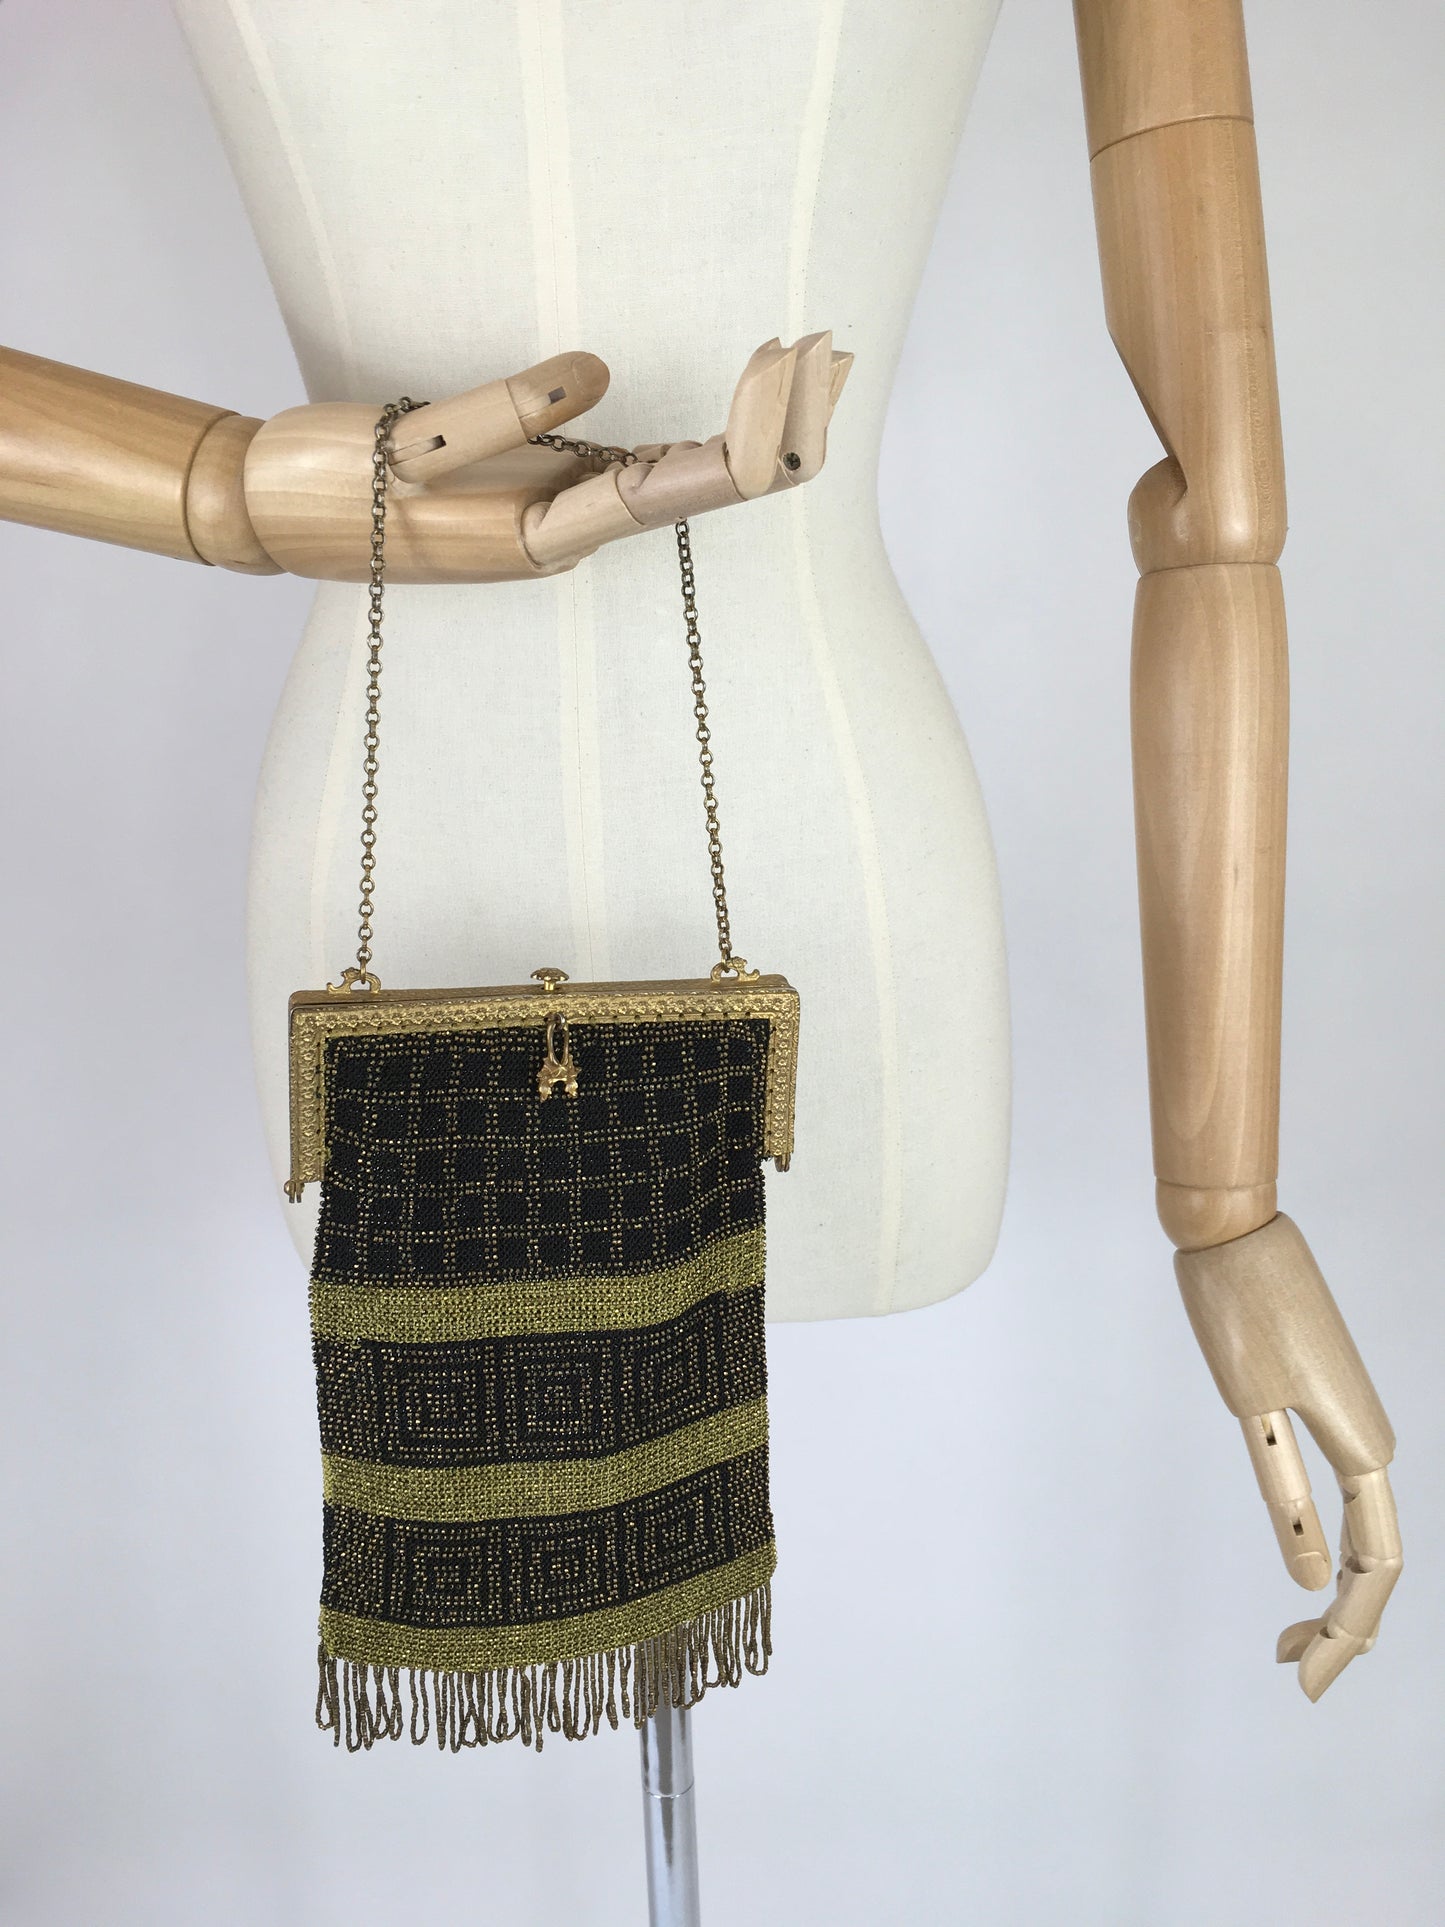 Original 1910s Chain Beaded Bag - In A Lovely Deco Pallet of Black and Gold